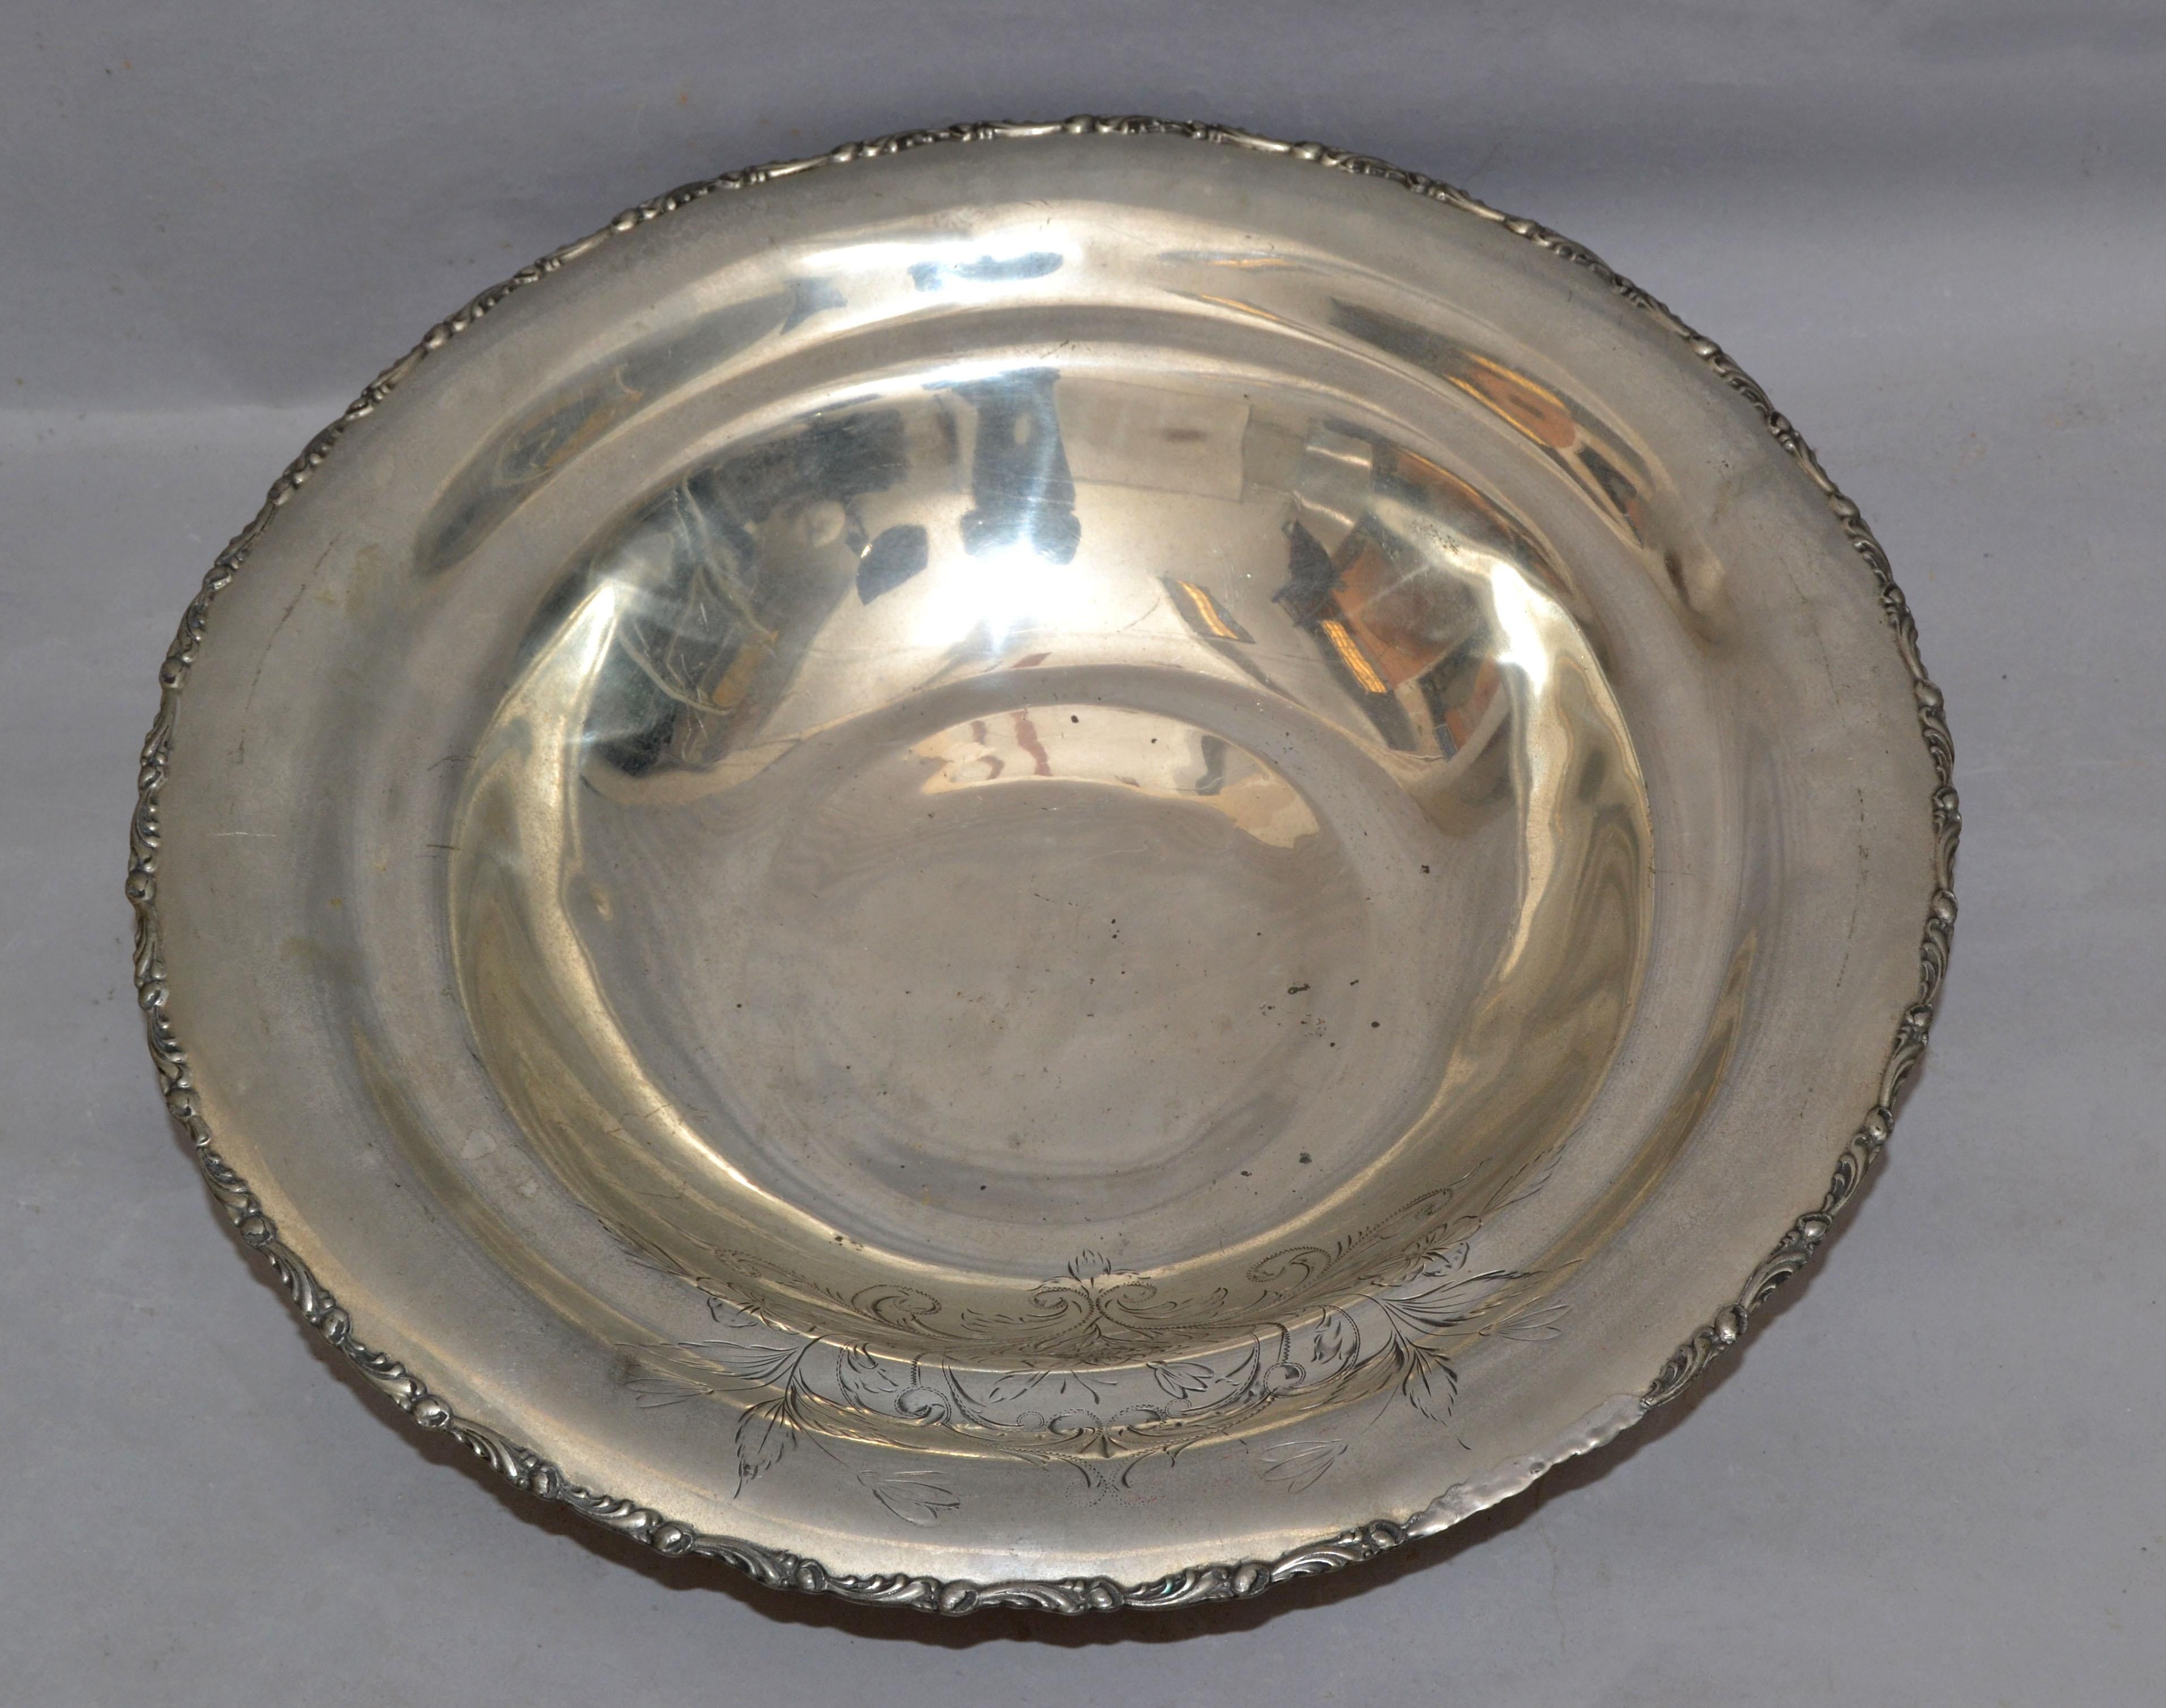 English Silver Plate Trademark Ornate Large Bowl Footed Serving Dish Punch Bowl (Englisch) im Angebot